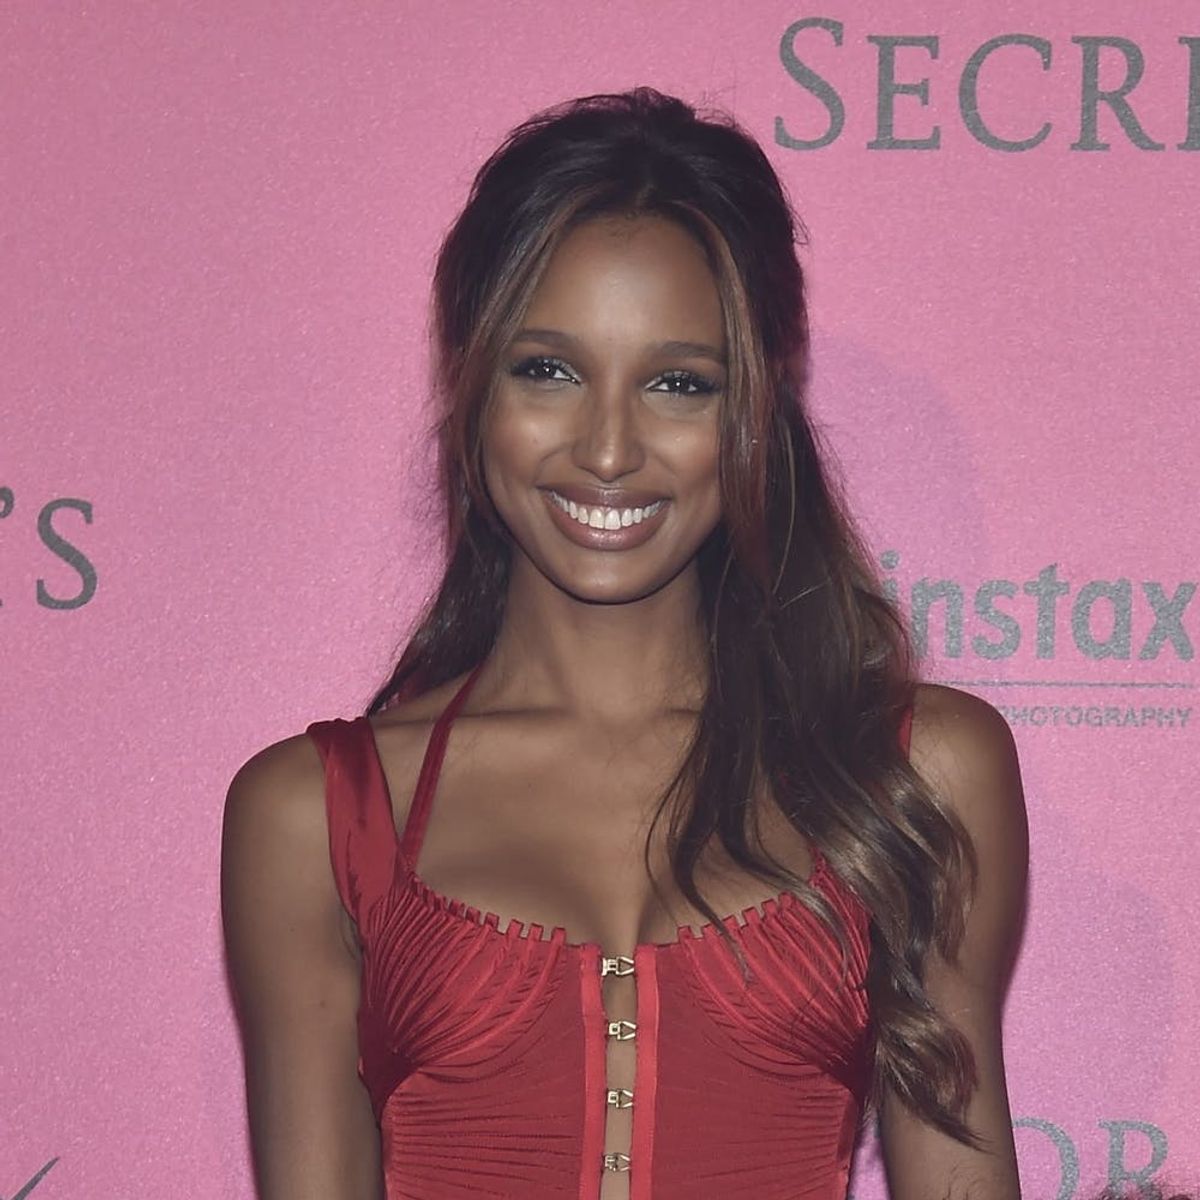 Jasmine Tookes Reveals How She Got in Shape for the Victoria’s Secret Fashion Show